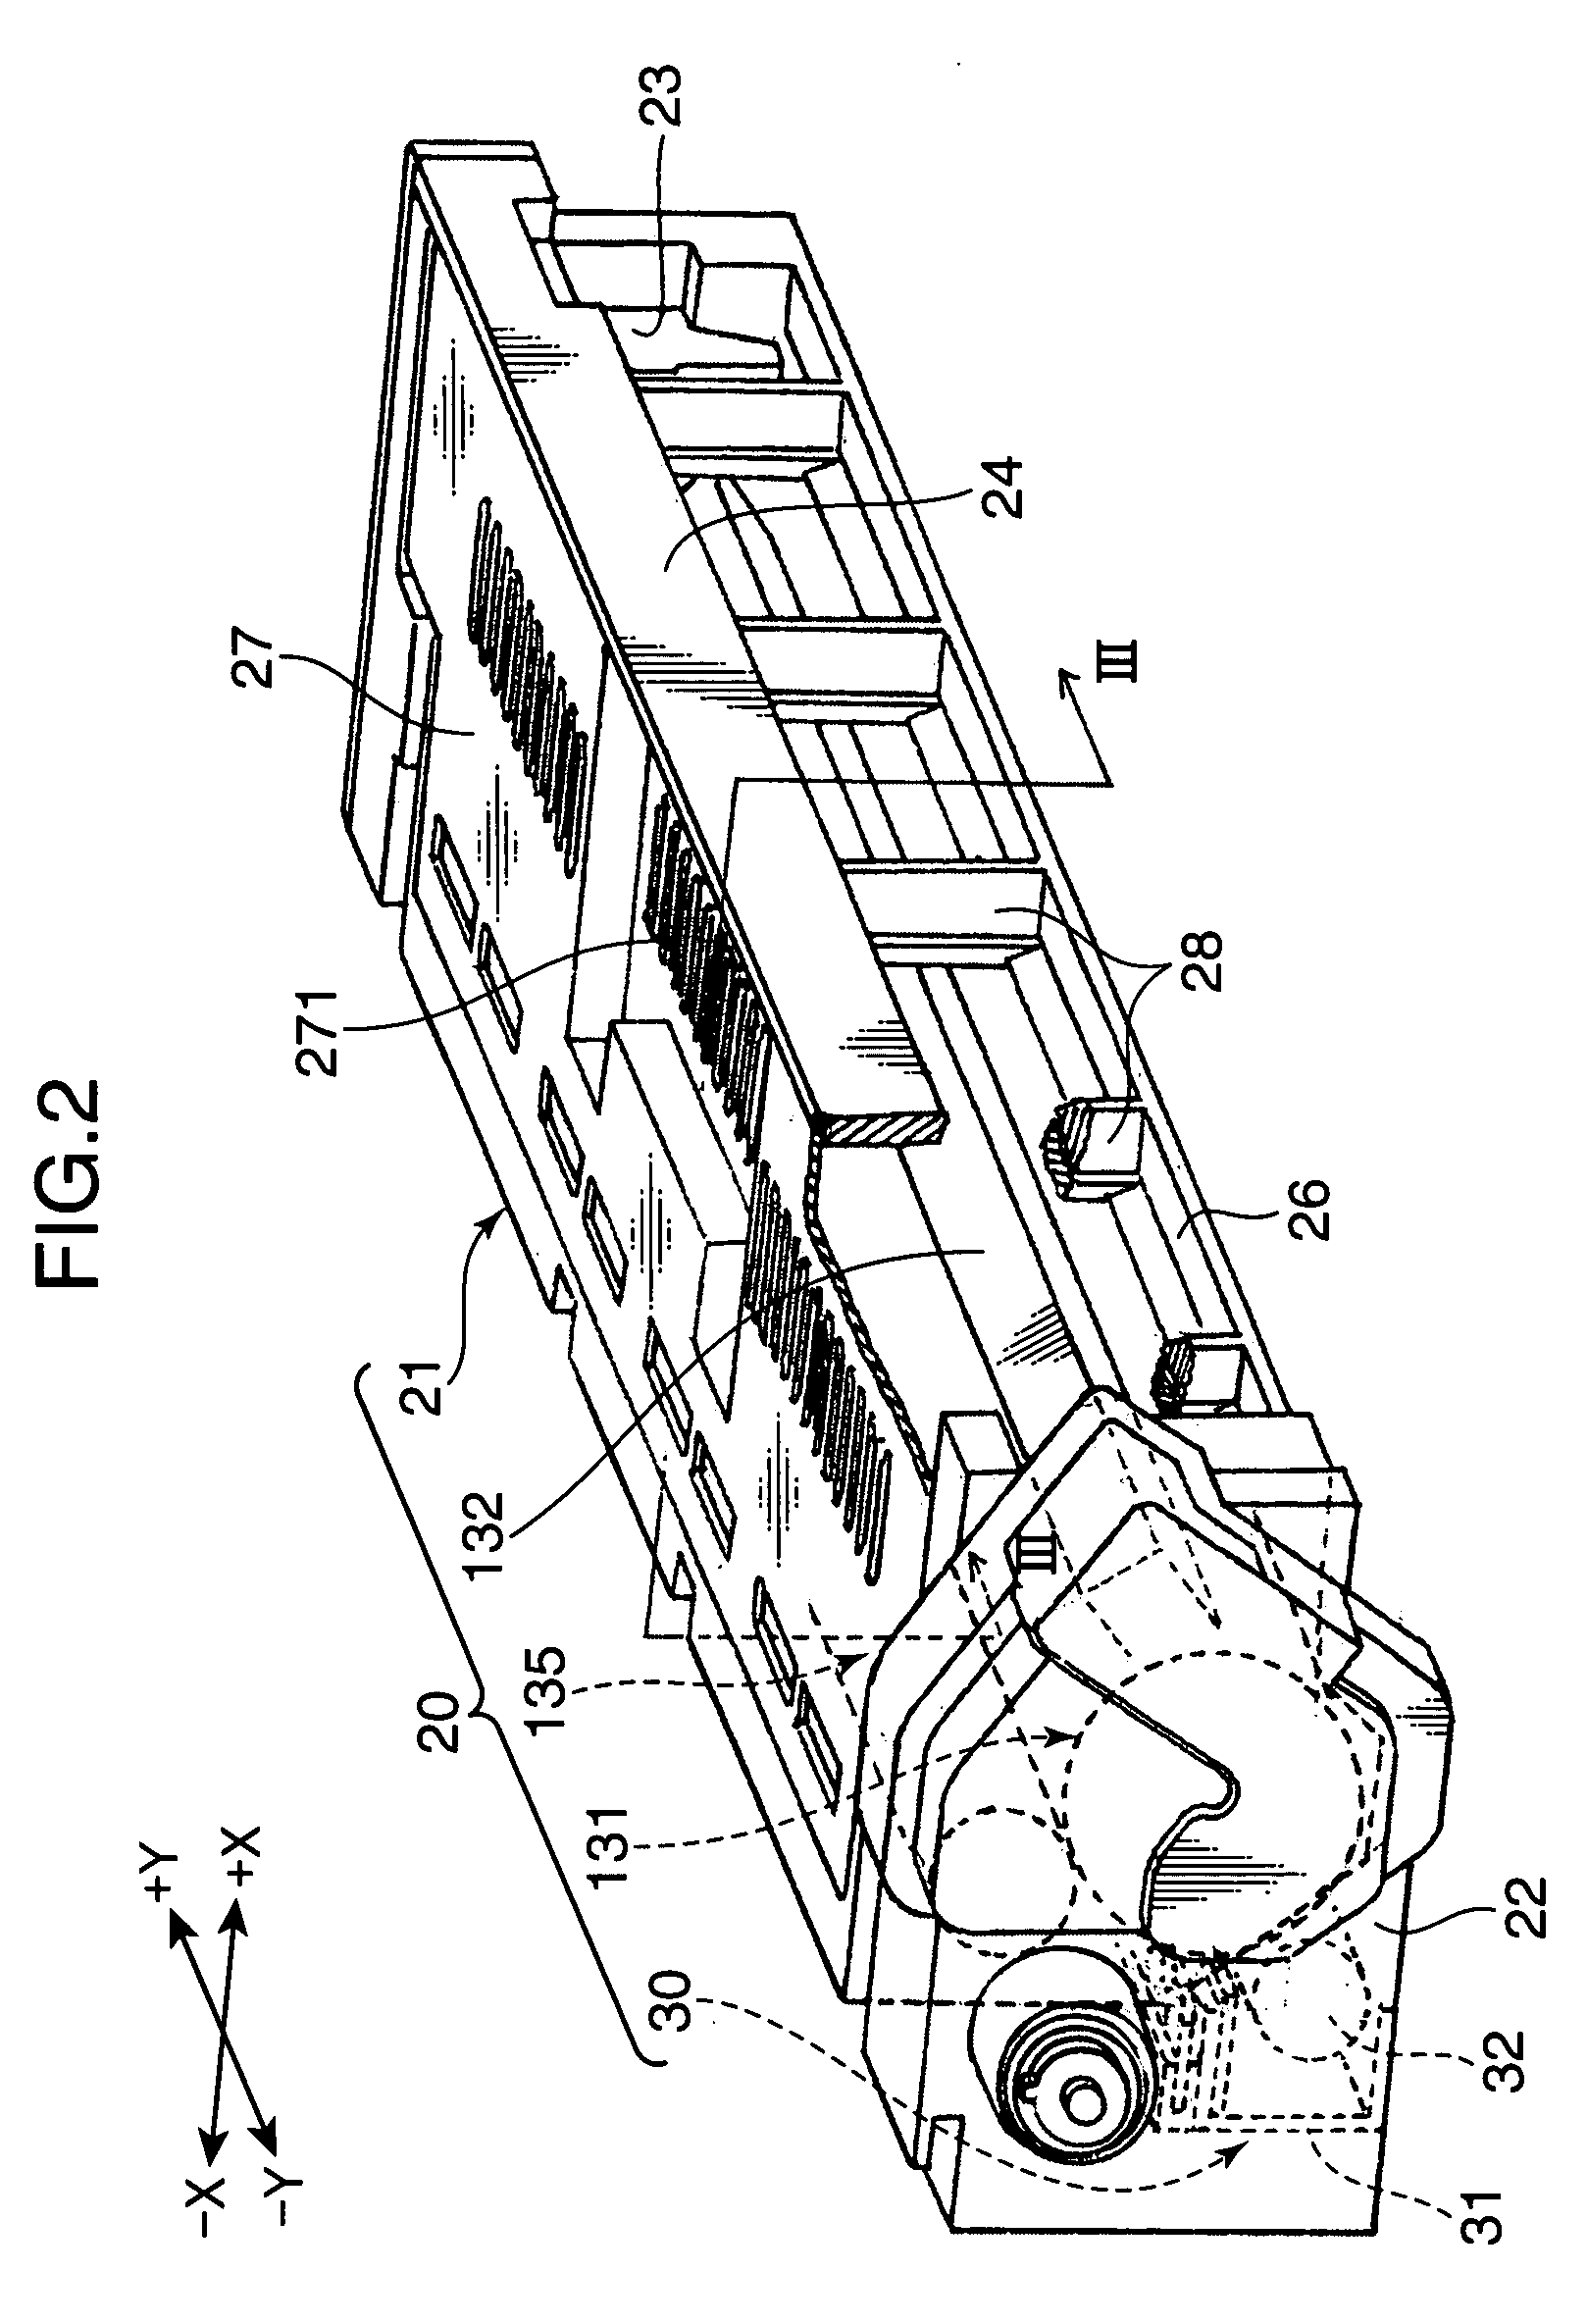 Image forming apparatus with static charge eliminator for discharging an electric charge on a transfer sheet